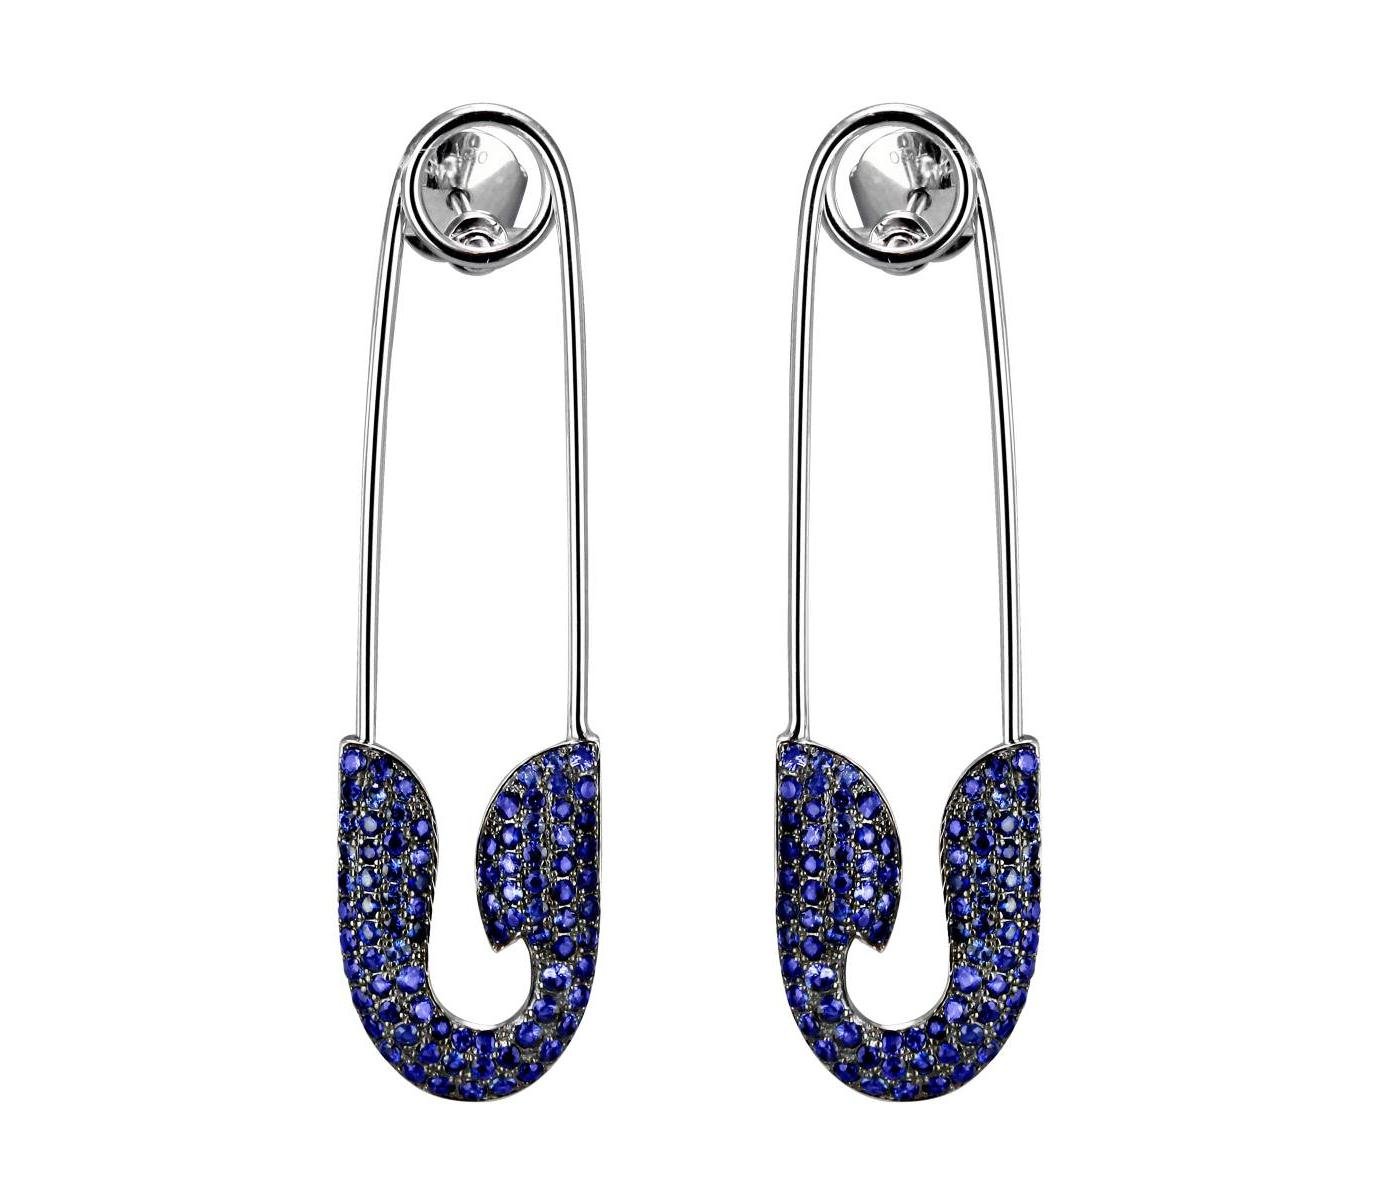 Earrings by Jacob and Co